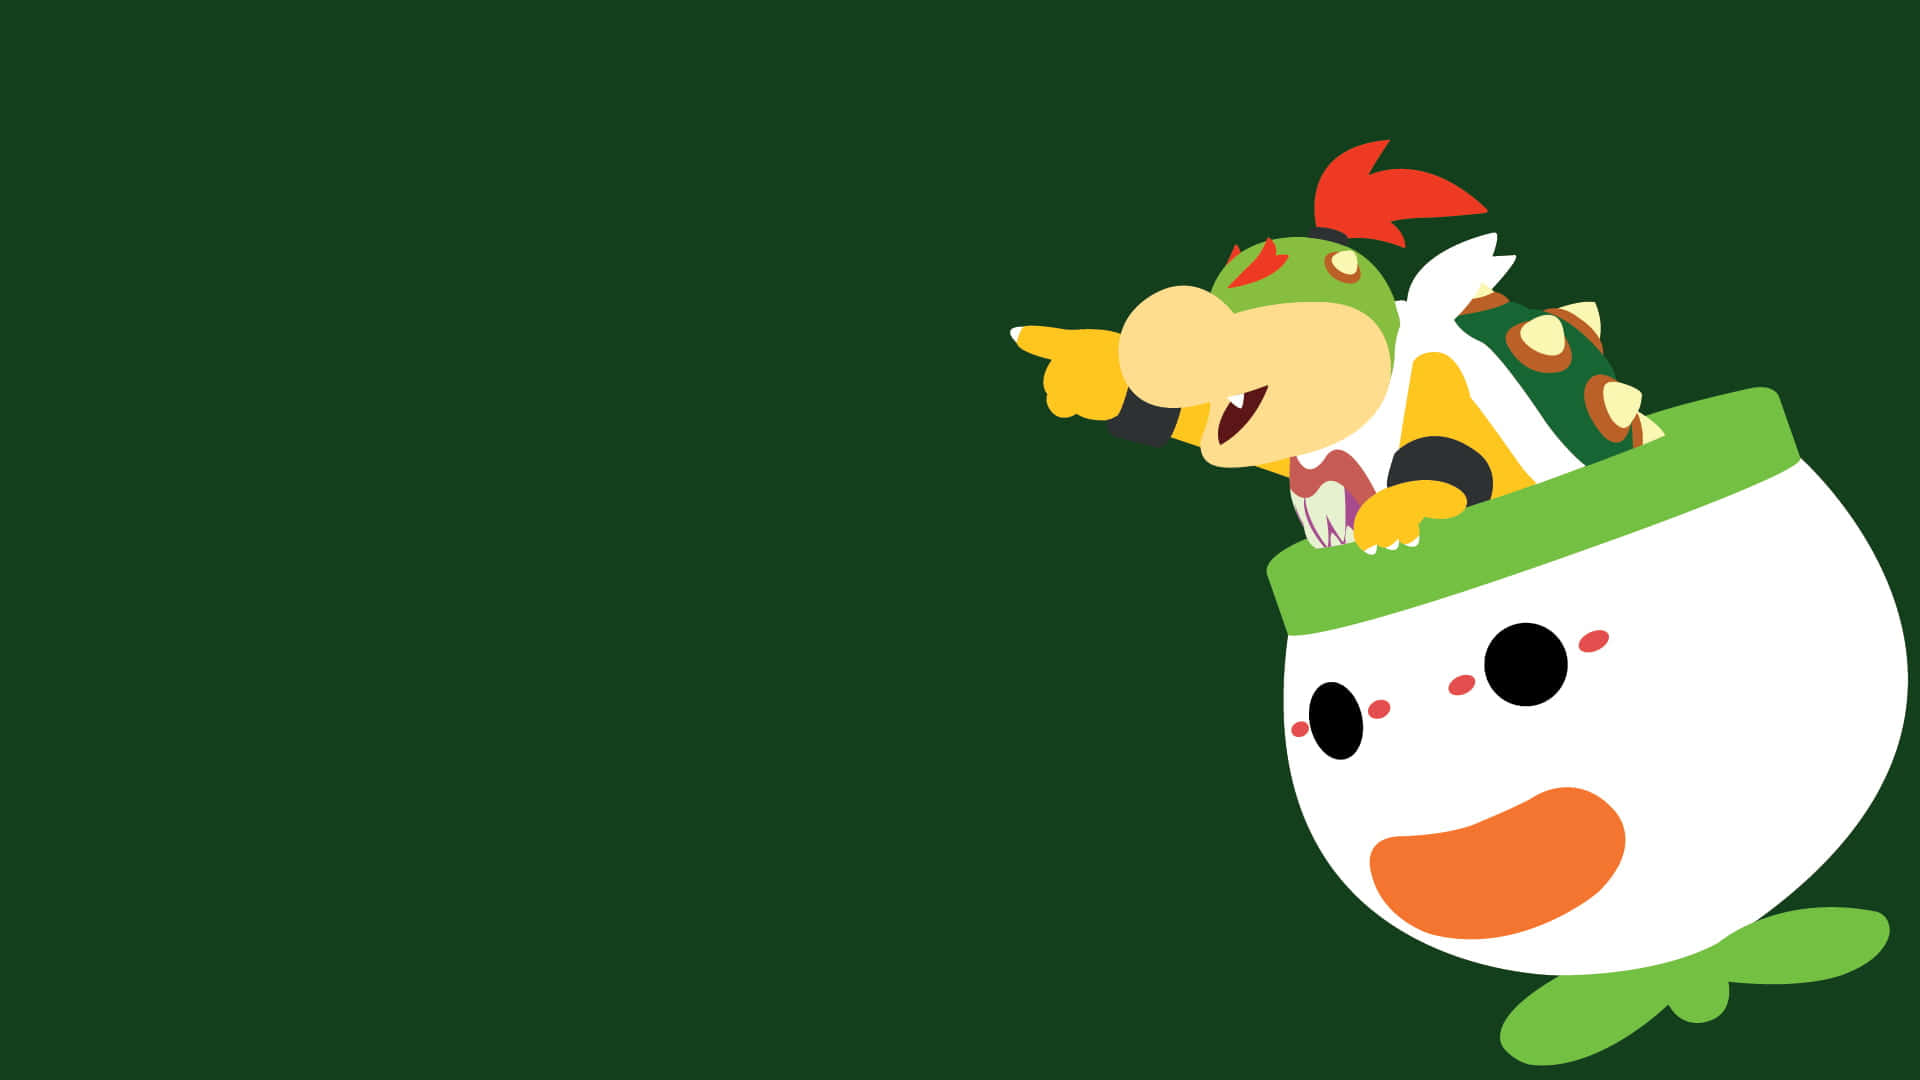 Bowser Jr. in action - The young prince of Koopas Wallpaper